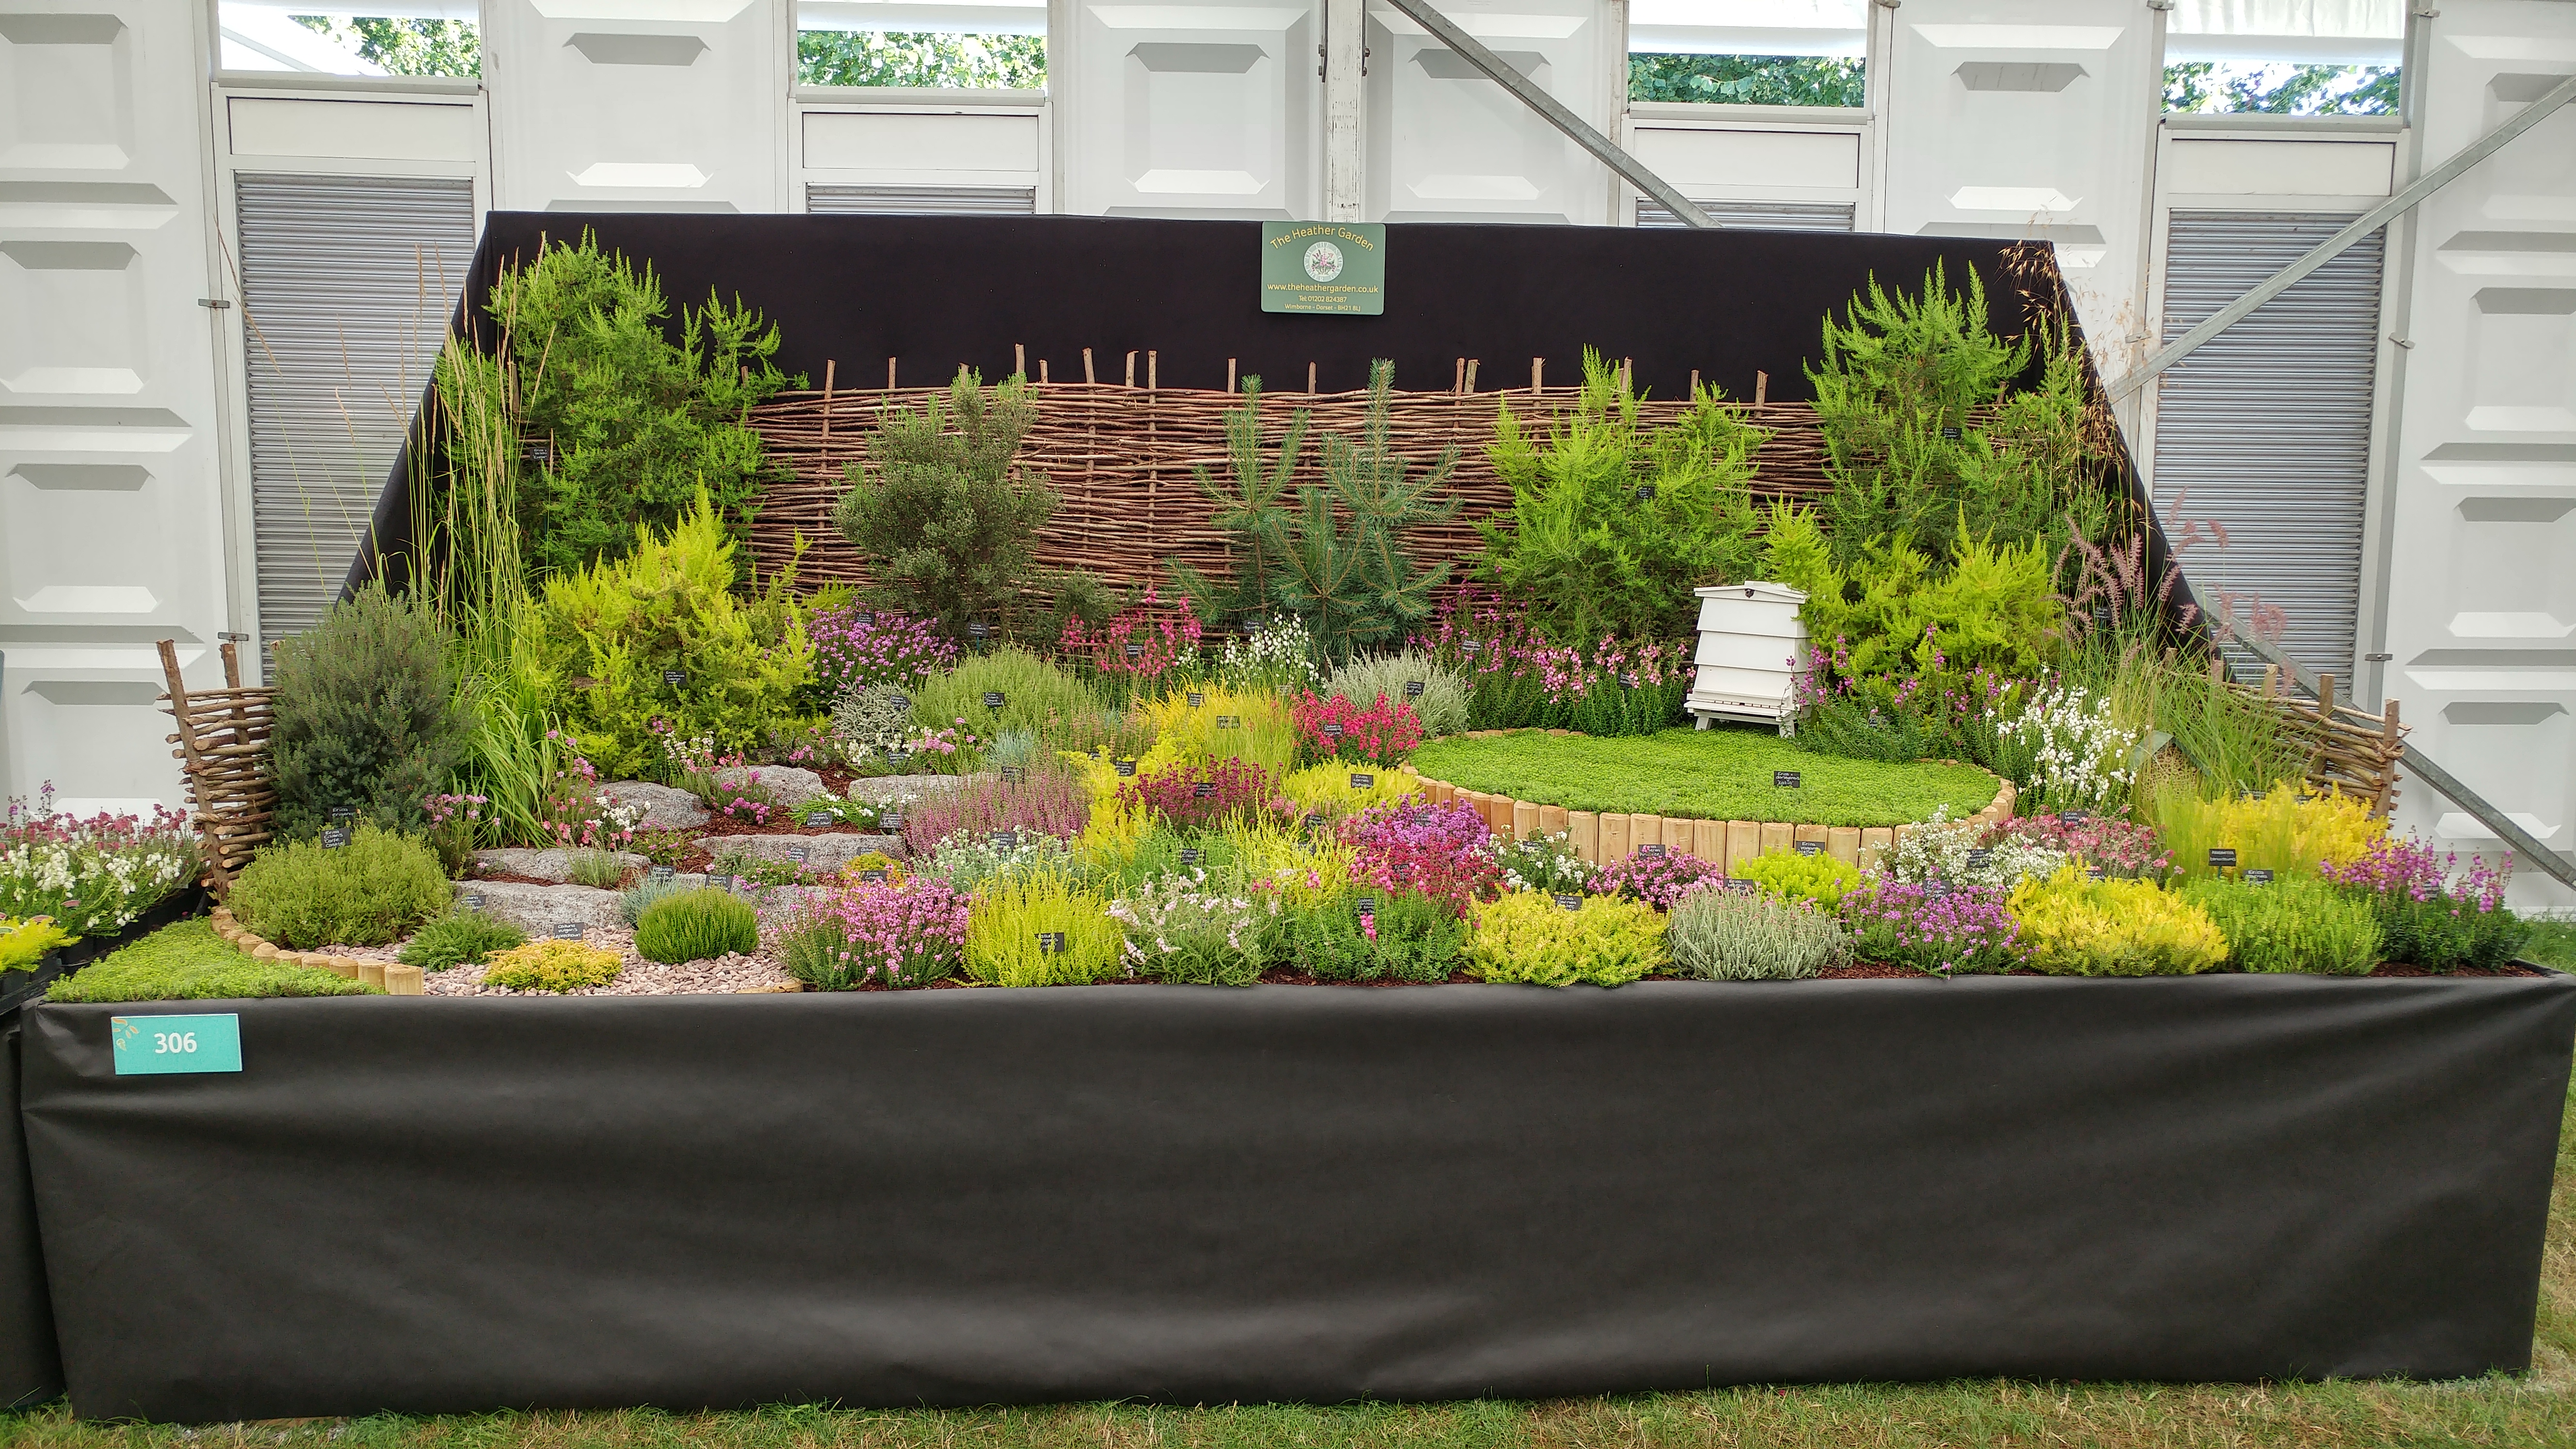 2017 Silver-Gilt for The Heather Garden Display at Hampton Court